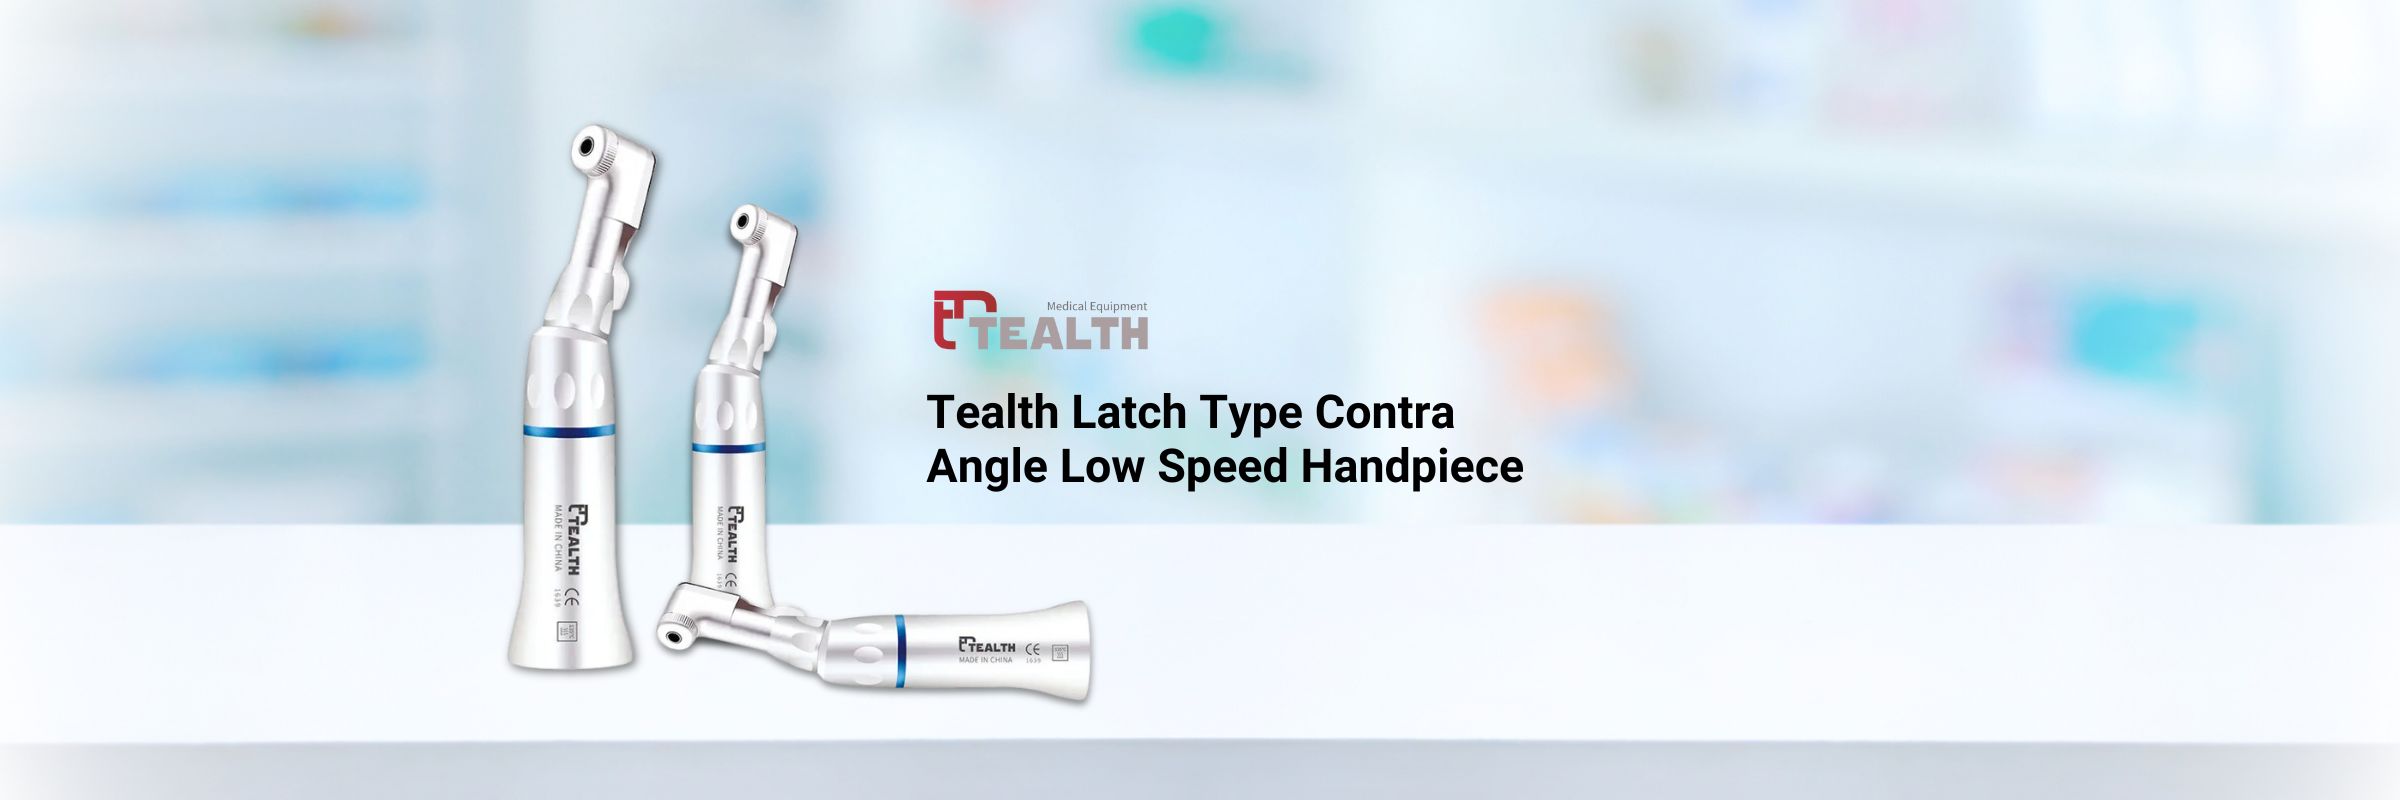 Tealth Latch Type Contra Angle Low Speed Handpiece